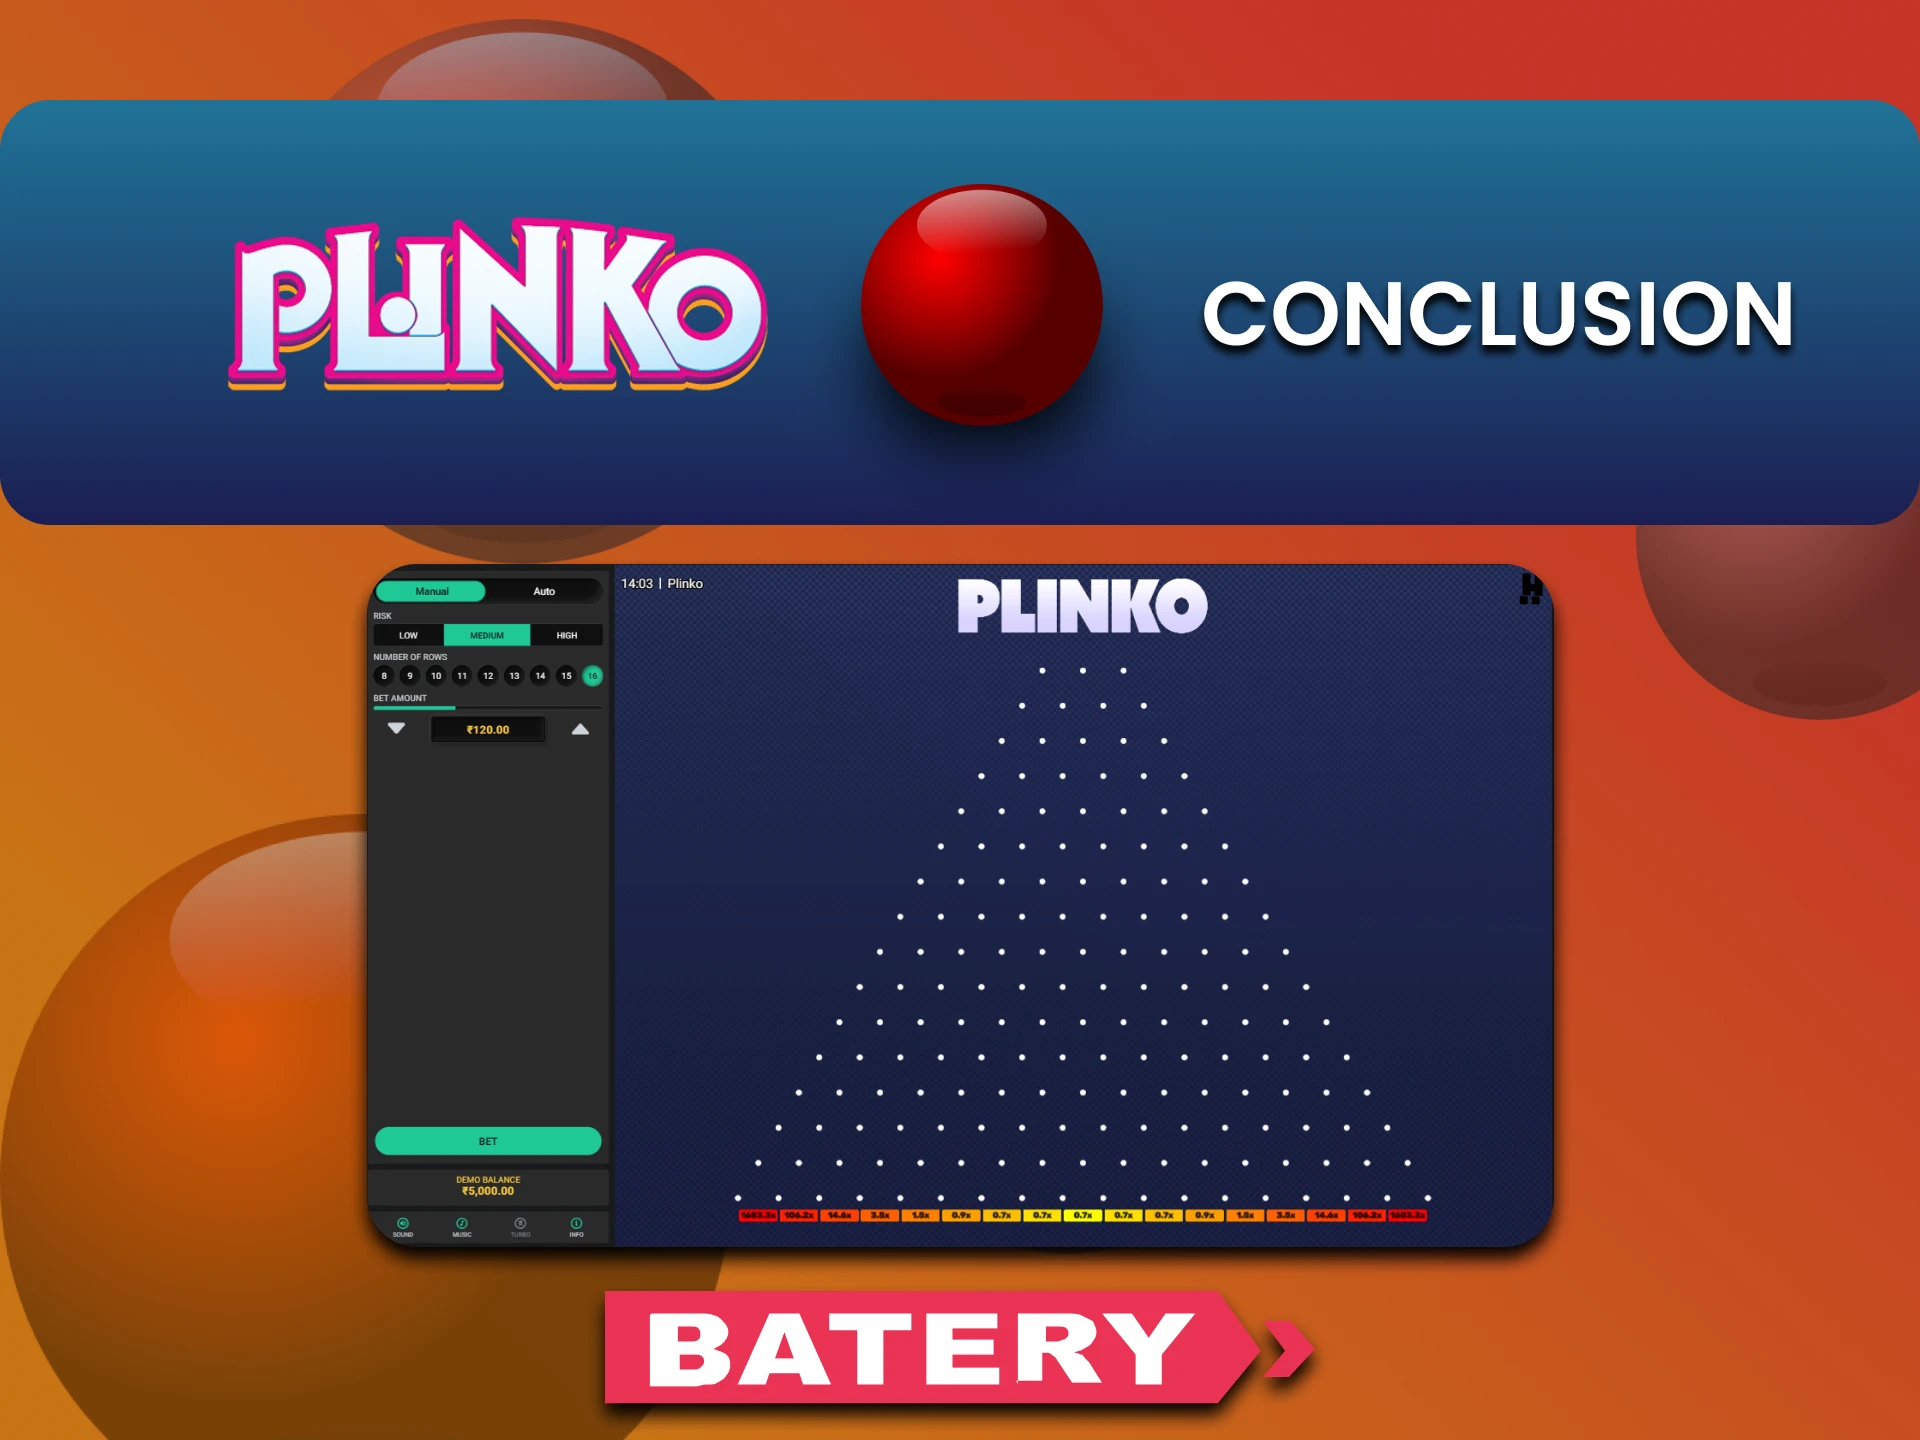 For playing Plinko, Batery is the best choice.